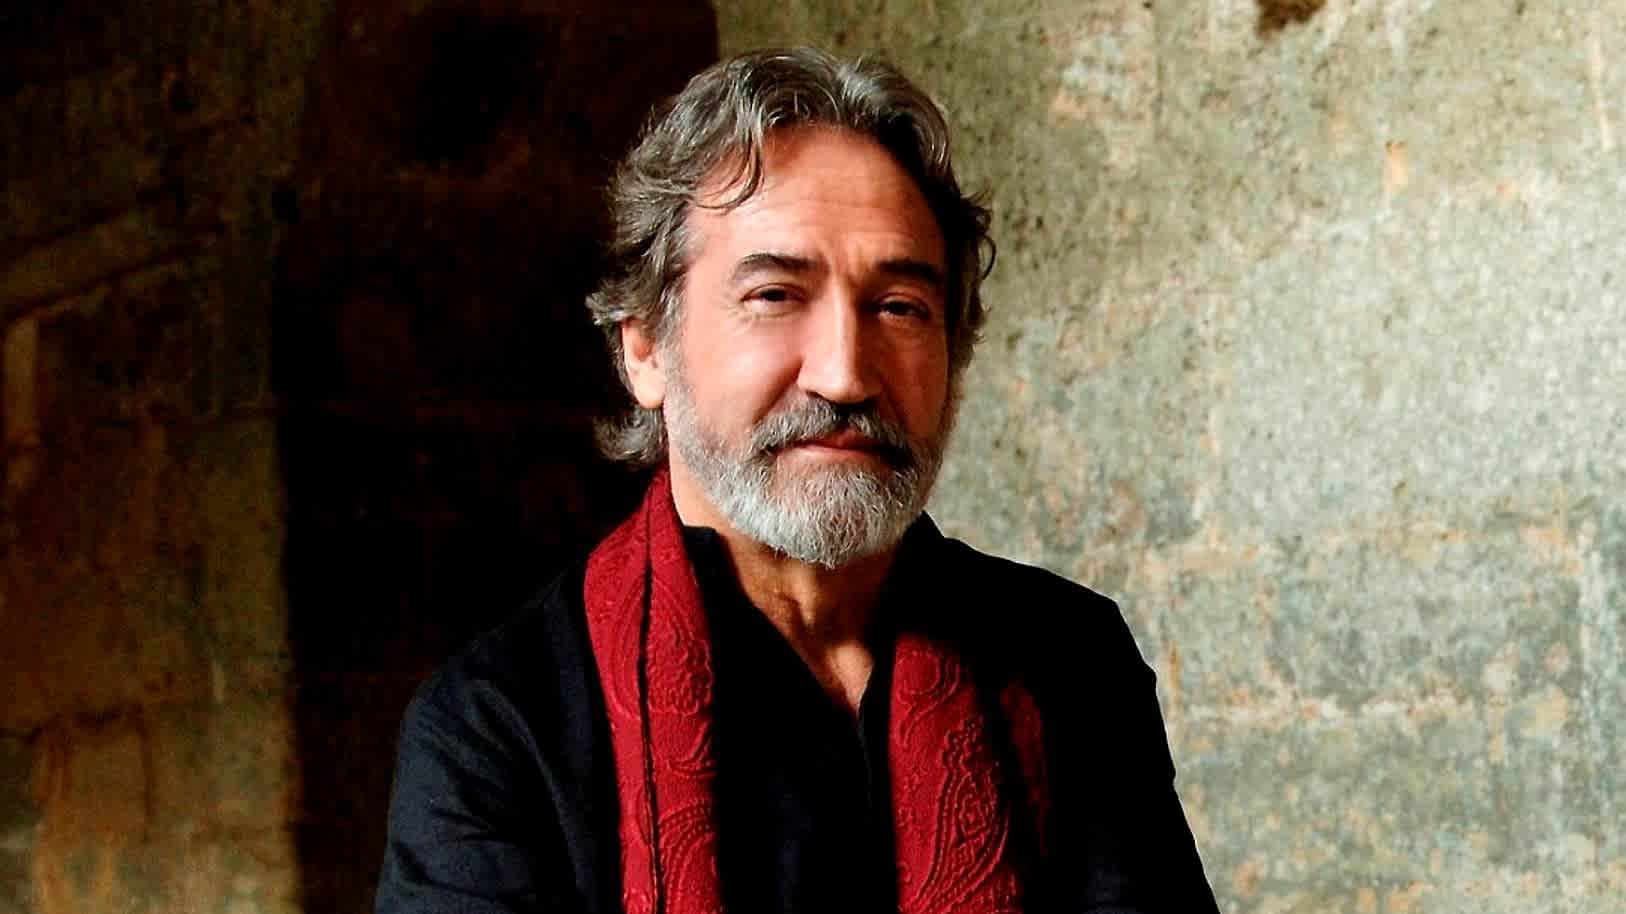 Musician Jordi Savall: ‘The west is an important culture, but not the only culture in the world’